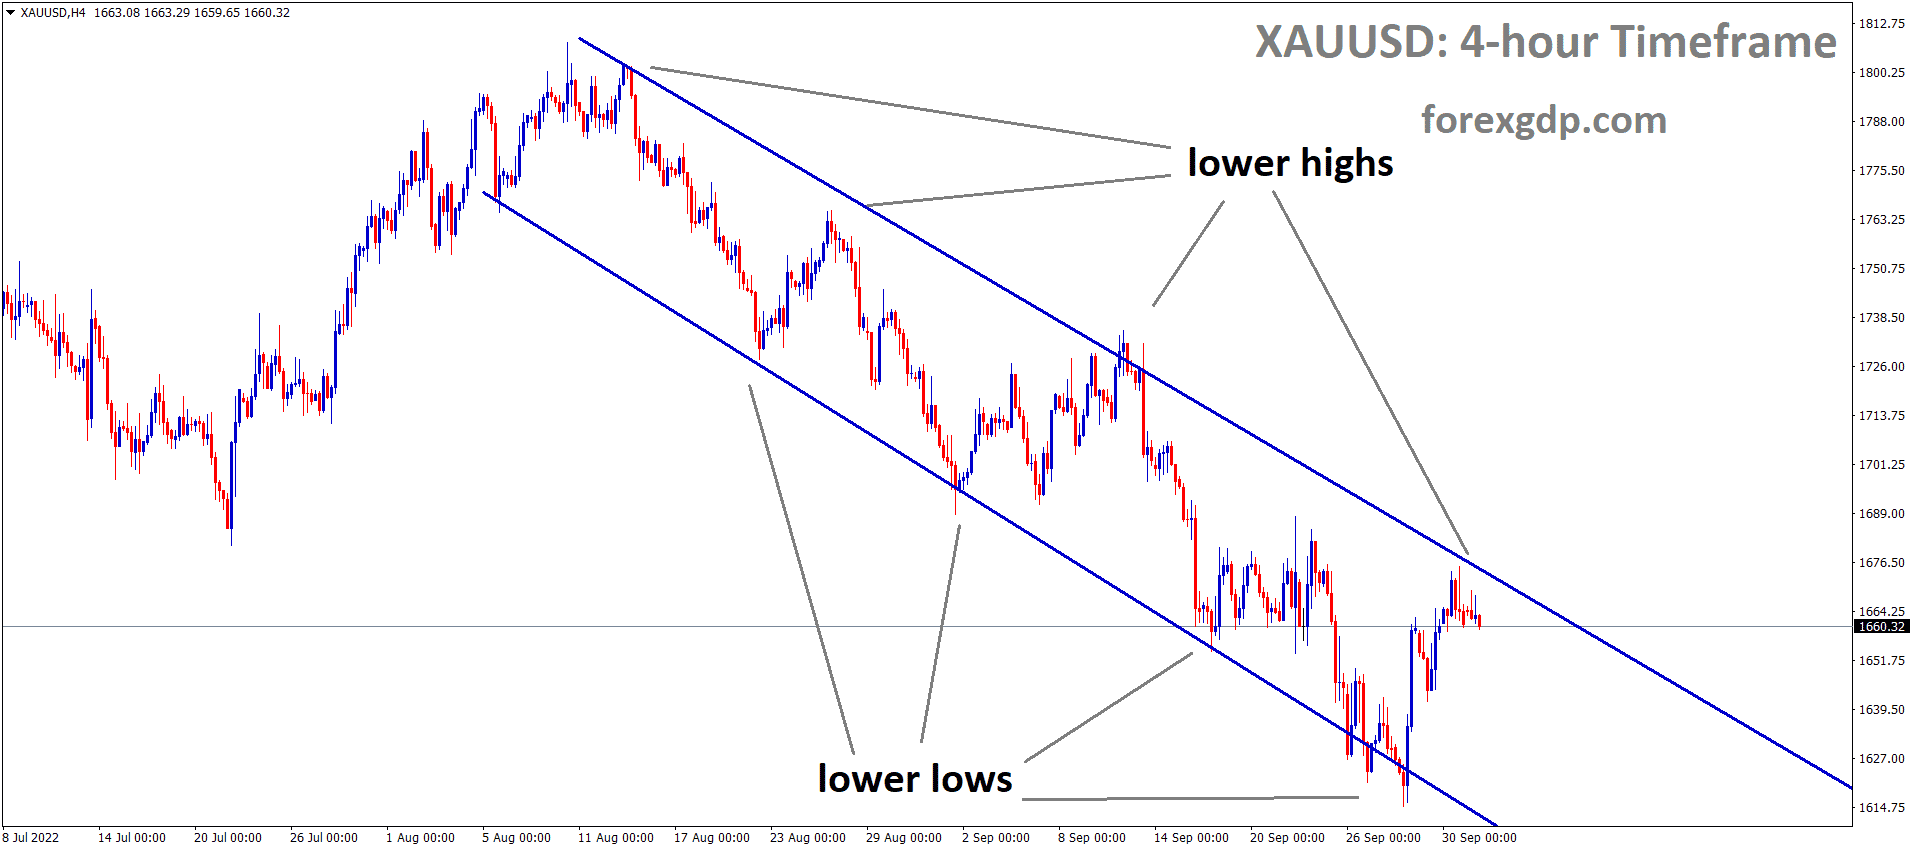 XAUUSD Gold price is moving in the Descending channel and the market has fallen from the lower high area of the channel.